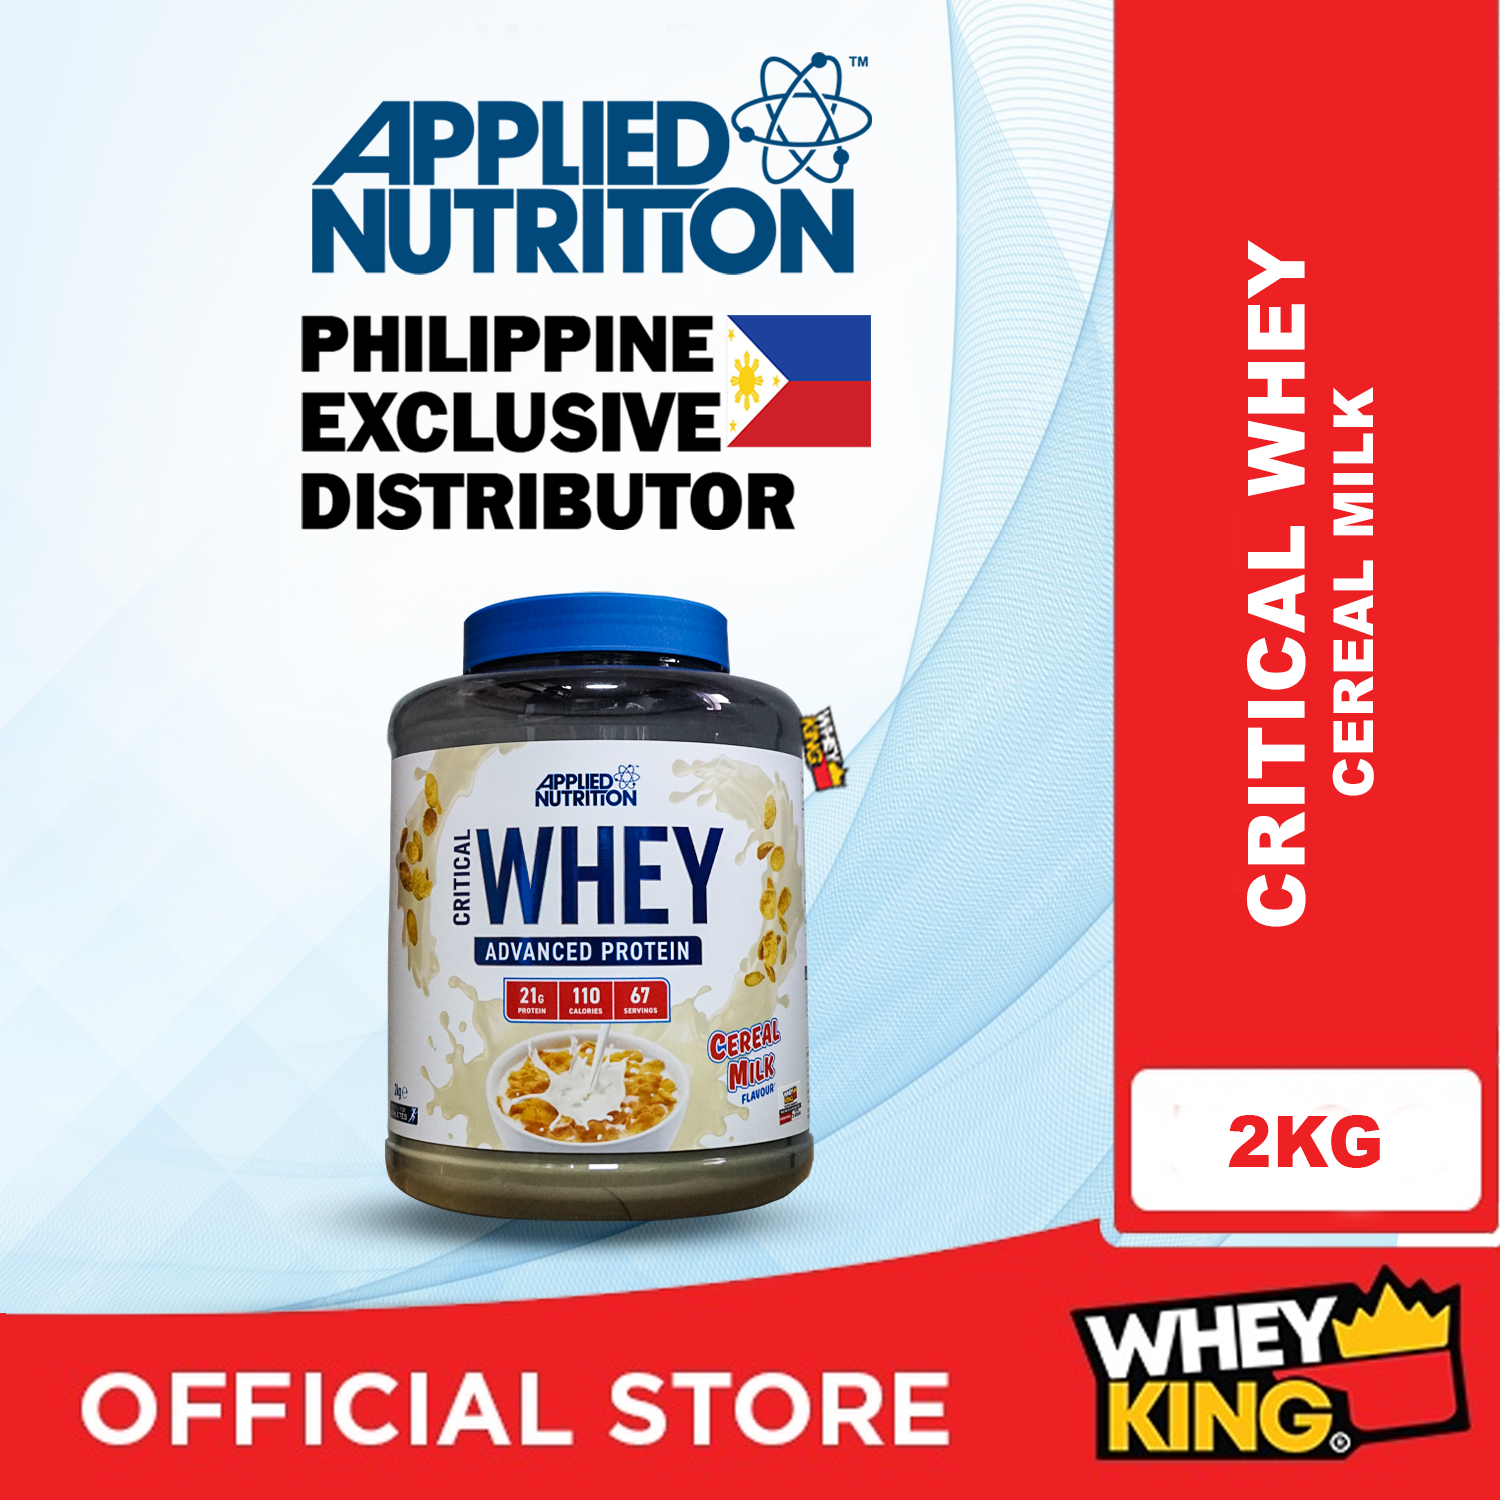 Applied Nutrition Critical Whey - 2KG